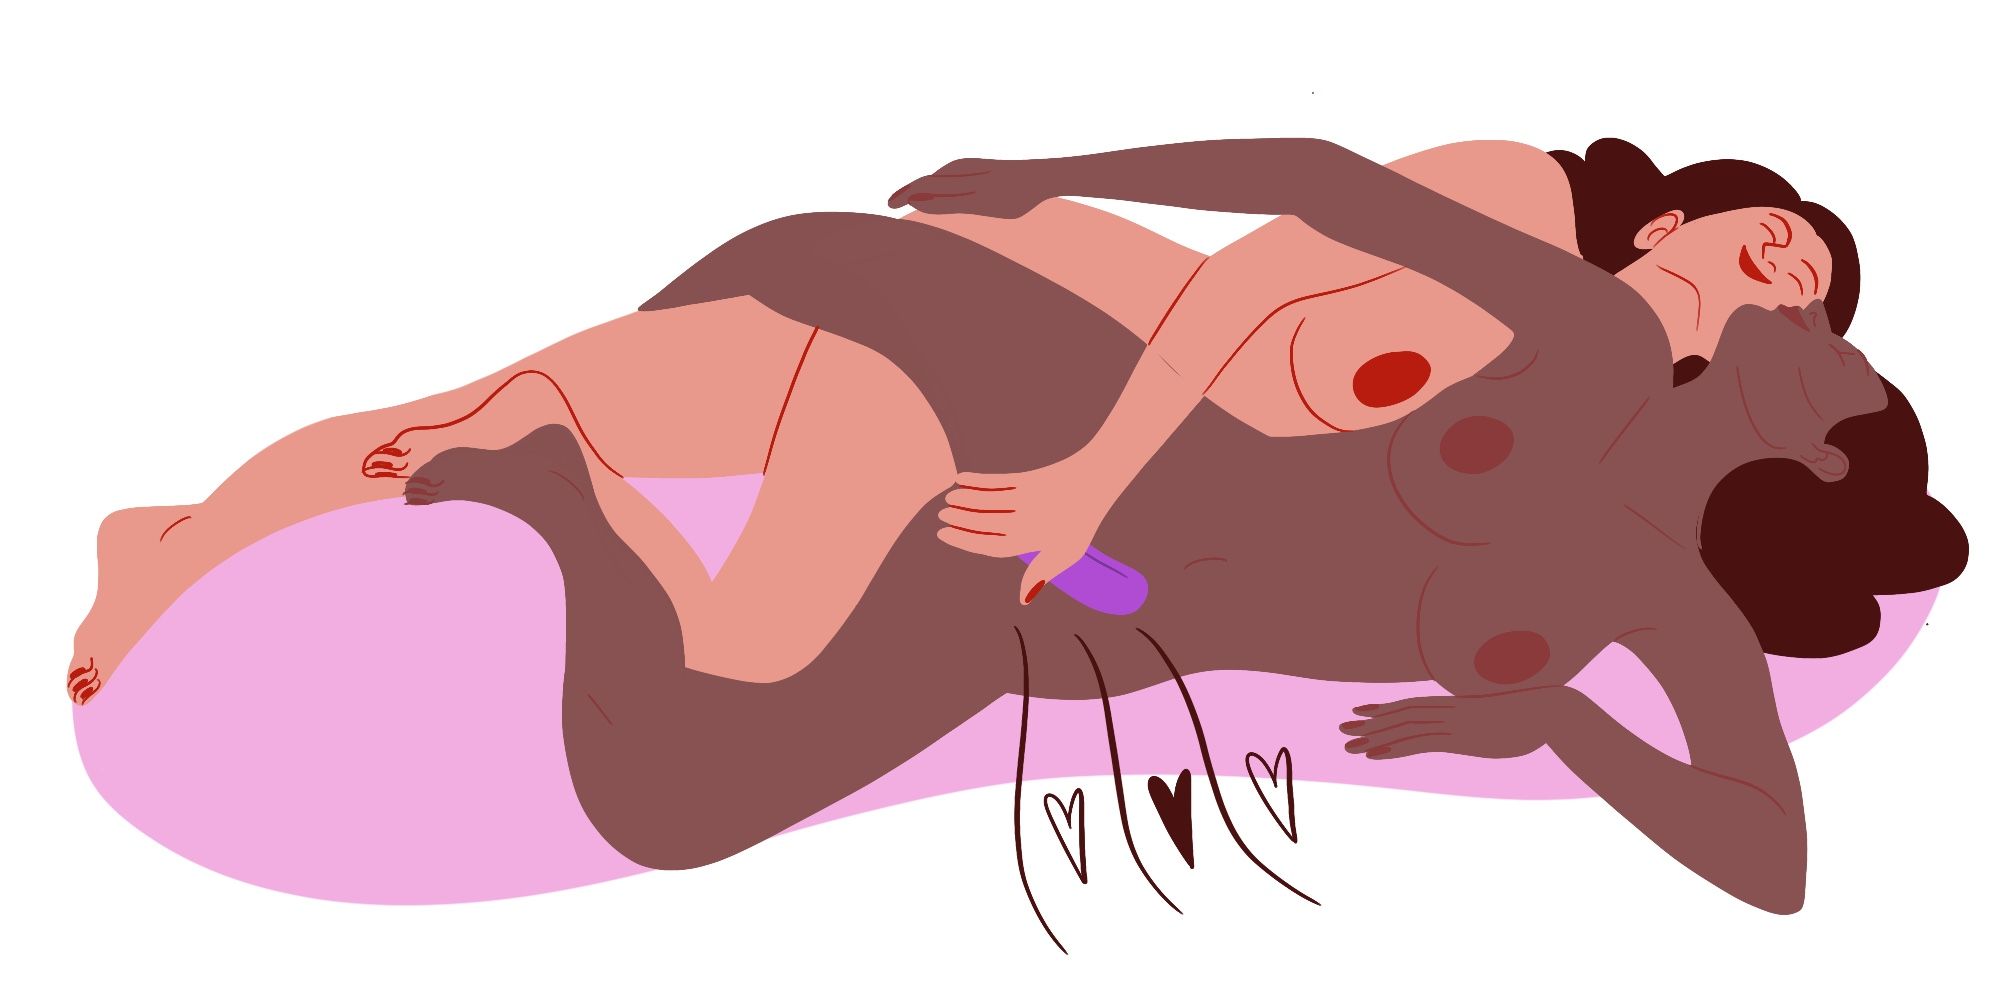 Orgasm sex positions for 7 Women